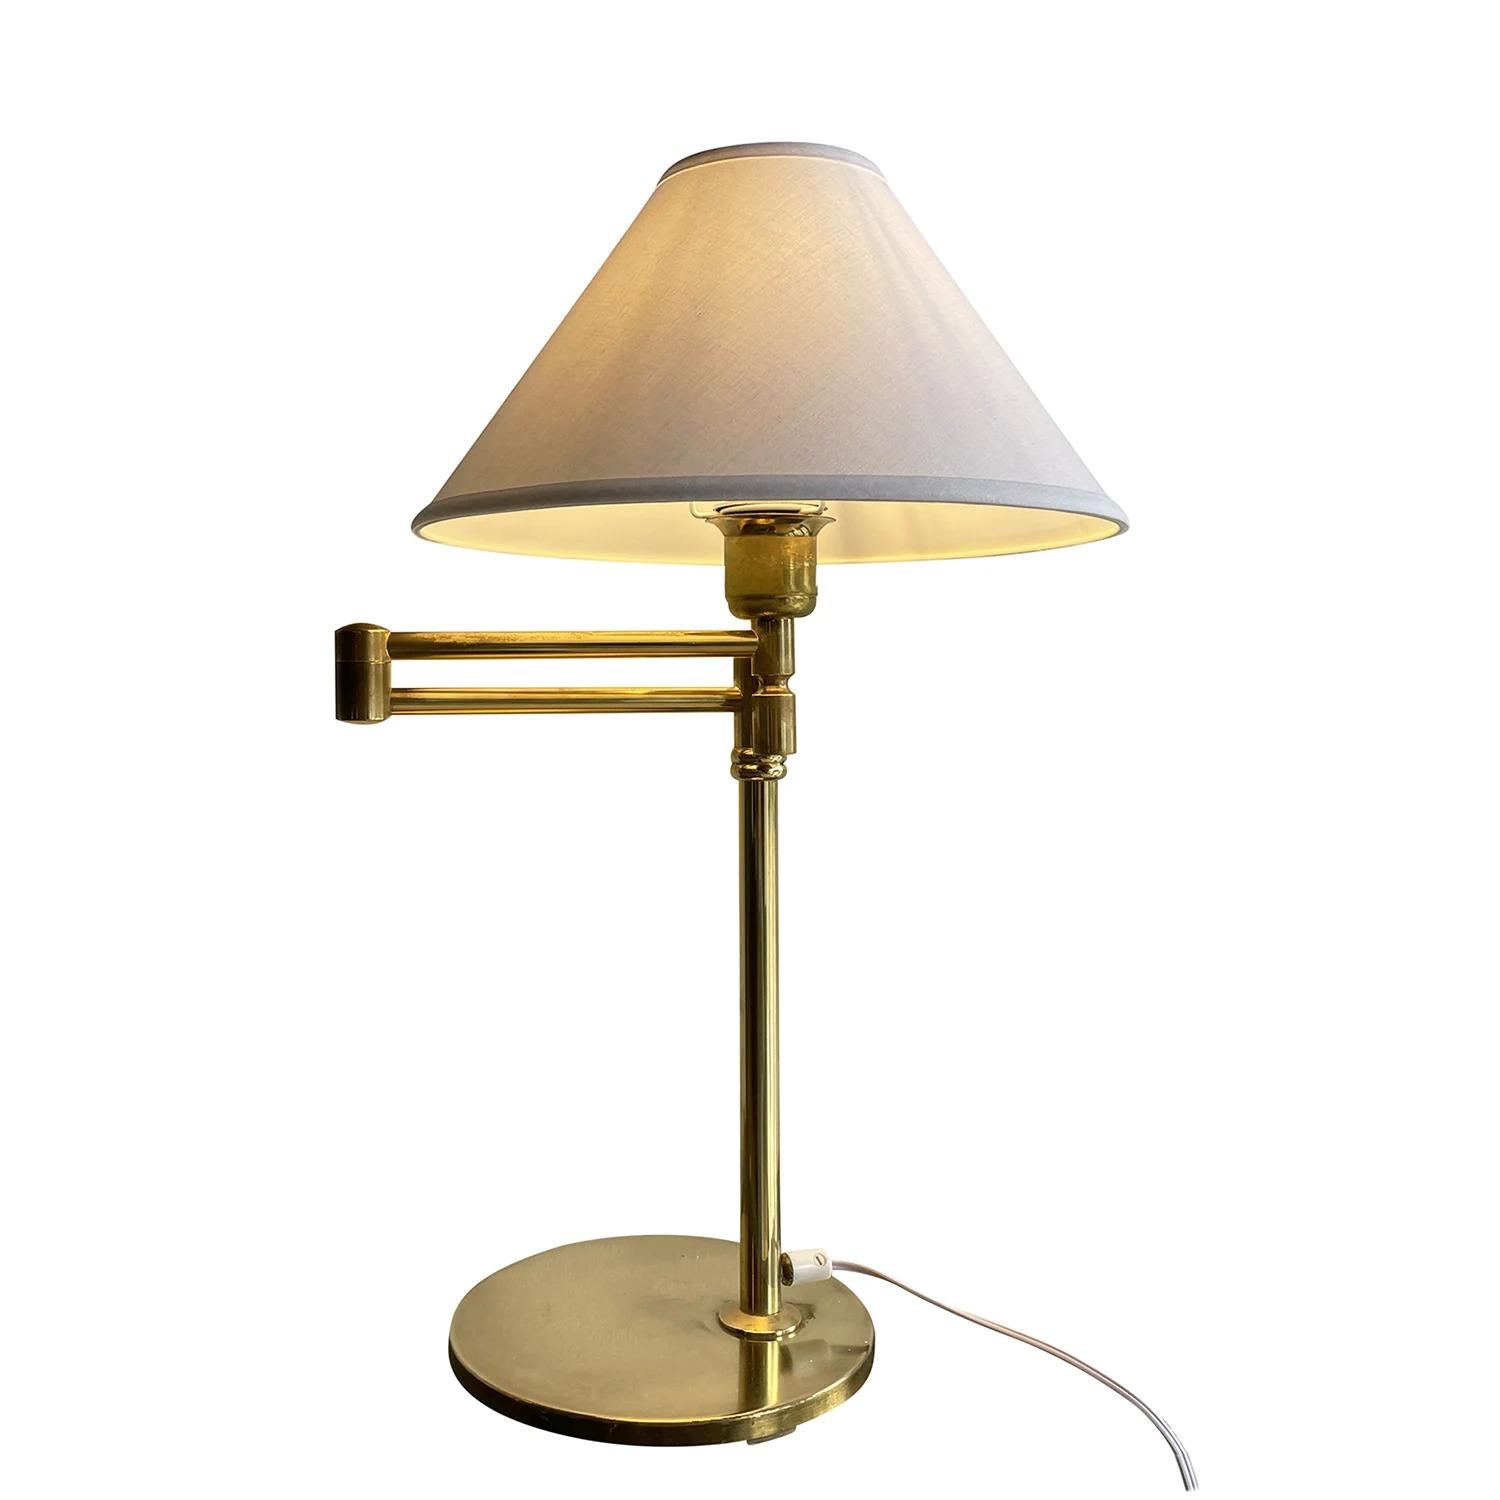 20th Century Swedish Pair of Polished Brass Reading Table Lamps by EWÅ, Värnamo For Sale 1